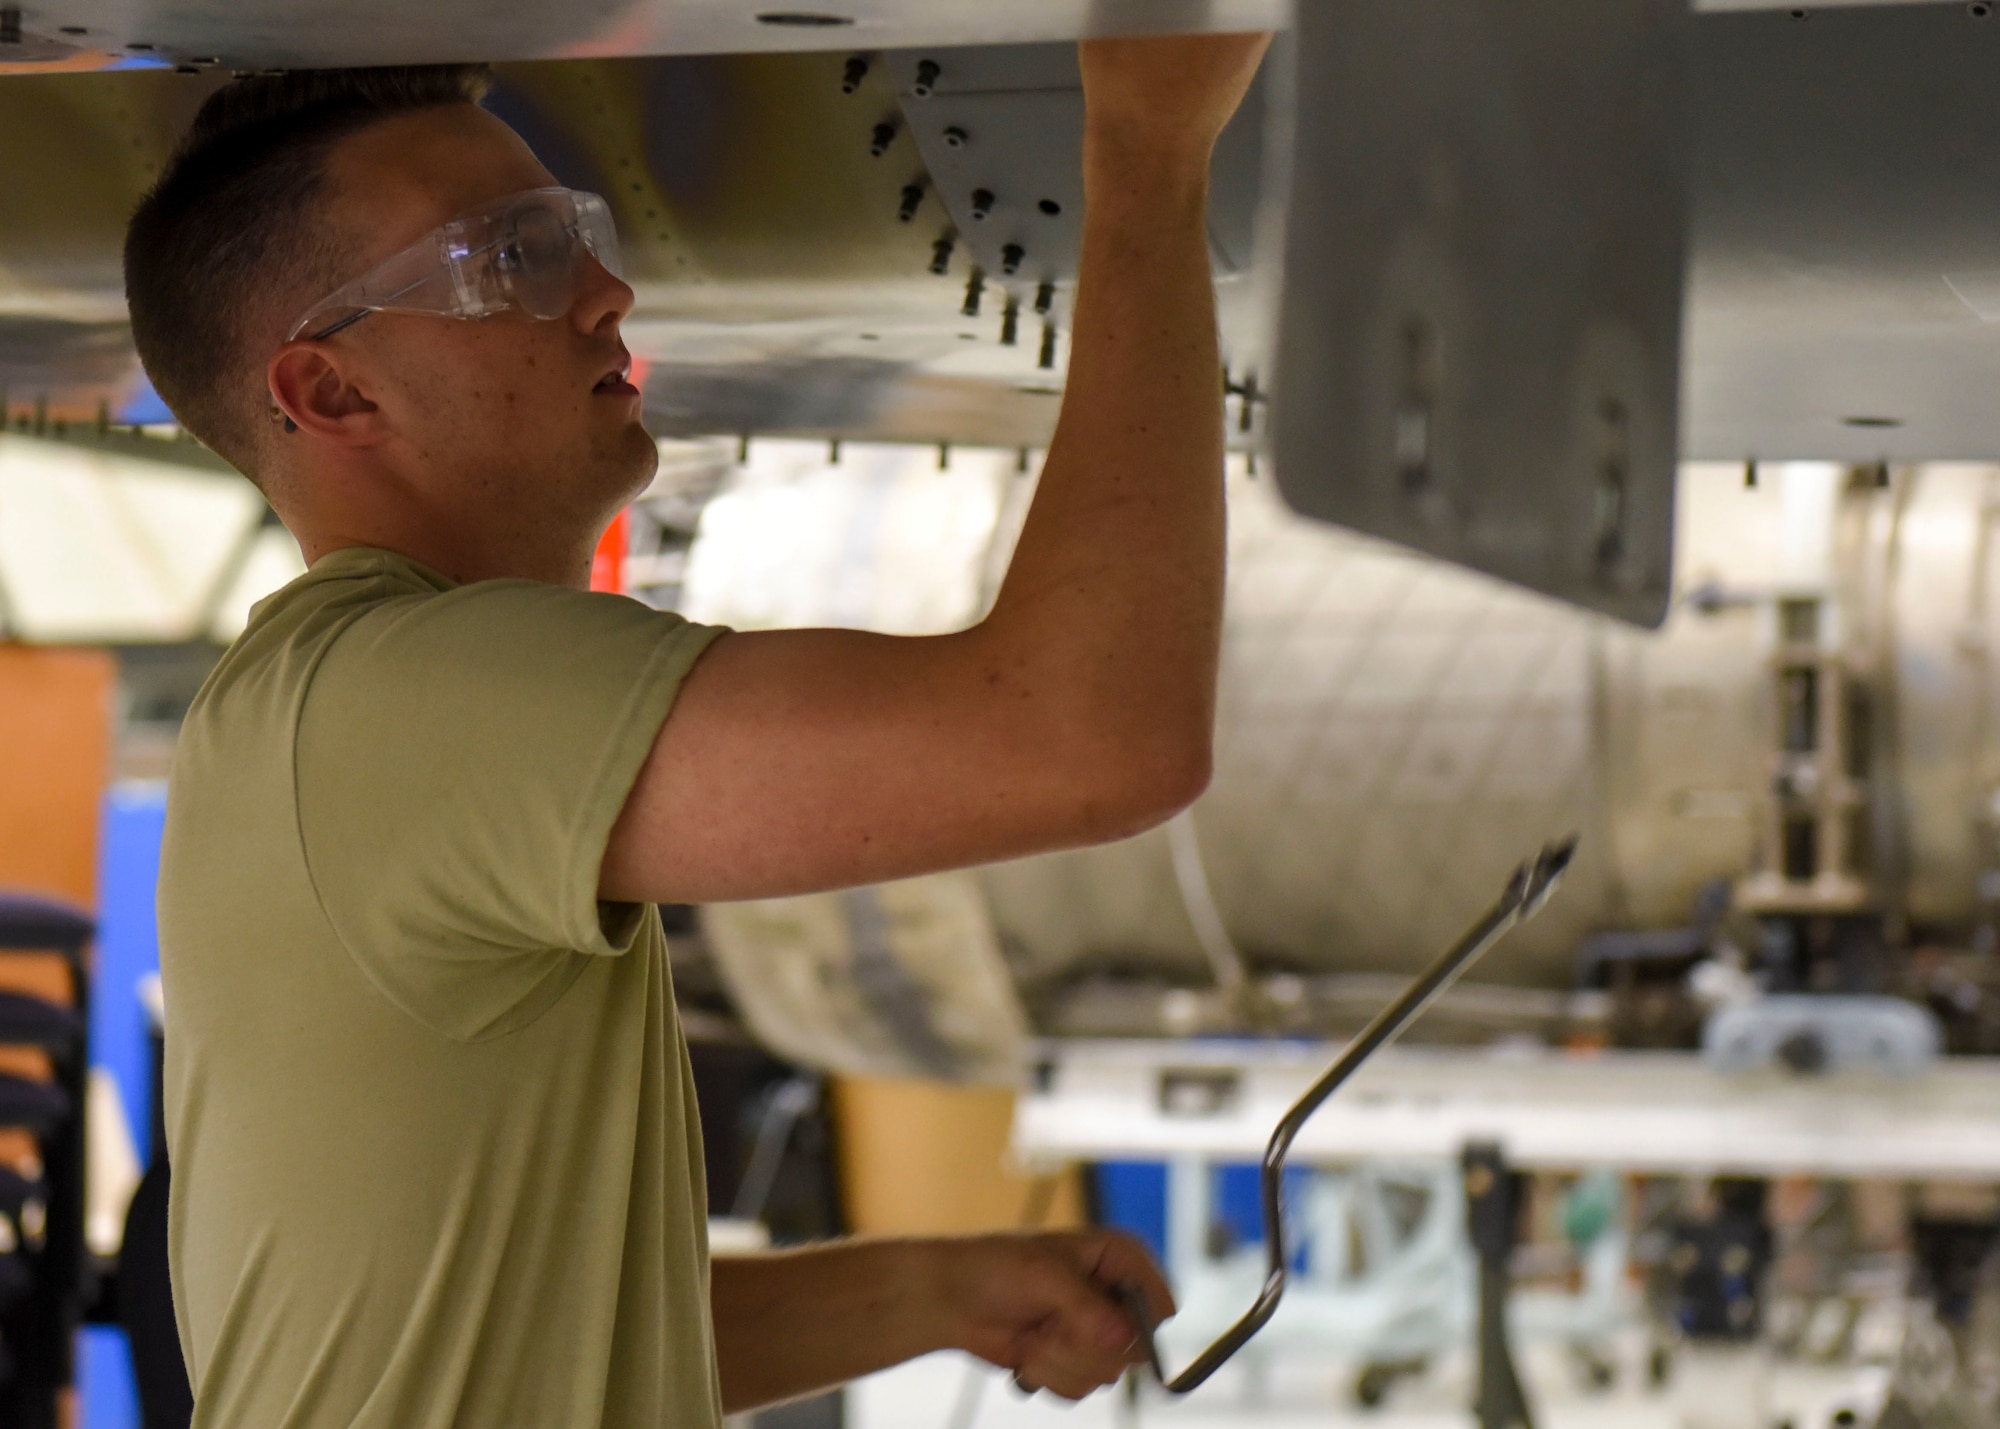 Airman 1st Class Daniel Hawkins, 361st Training Squadron aerospace propulsion apprentice, prepares a McDonnell Douglas F-15 Eagle for engine removal at Sheppard Air Force Base, Texas, Jun. 10, 2019. Hawkins, an ACE award recipient, received a score of 100% on all of his progress checks and block tests during his training course. Hawkins enjoys the challenges that along come with his job. (U.S. Air Force photo by Senior Airman Ilyana A. Escalona)